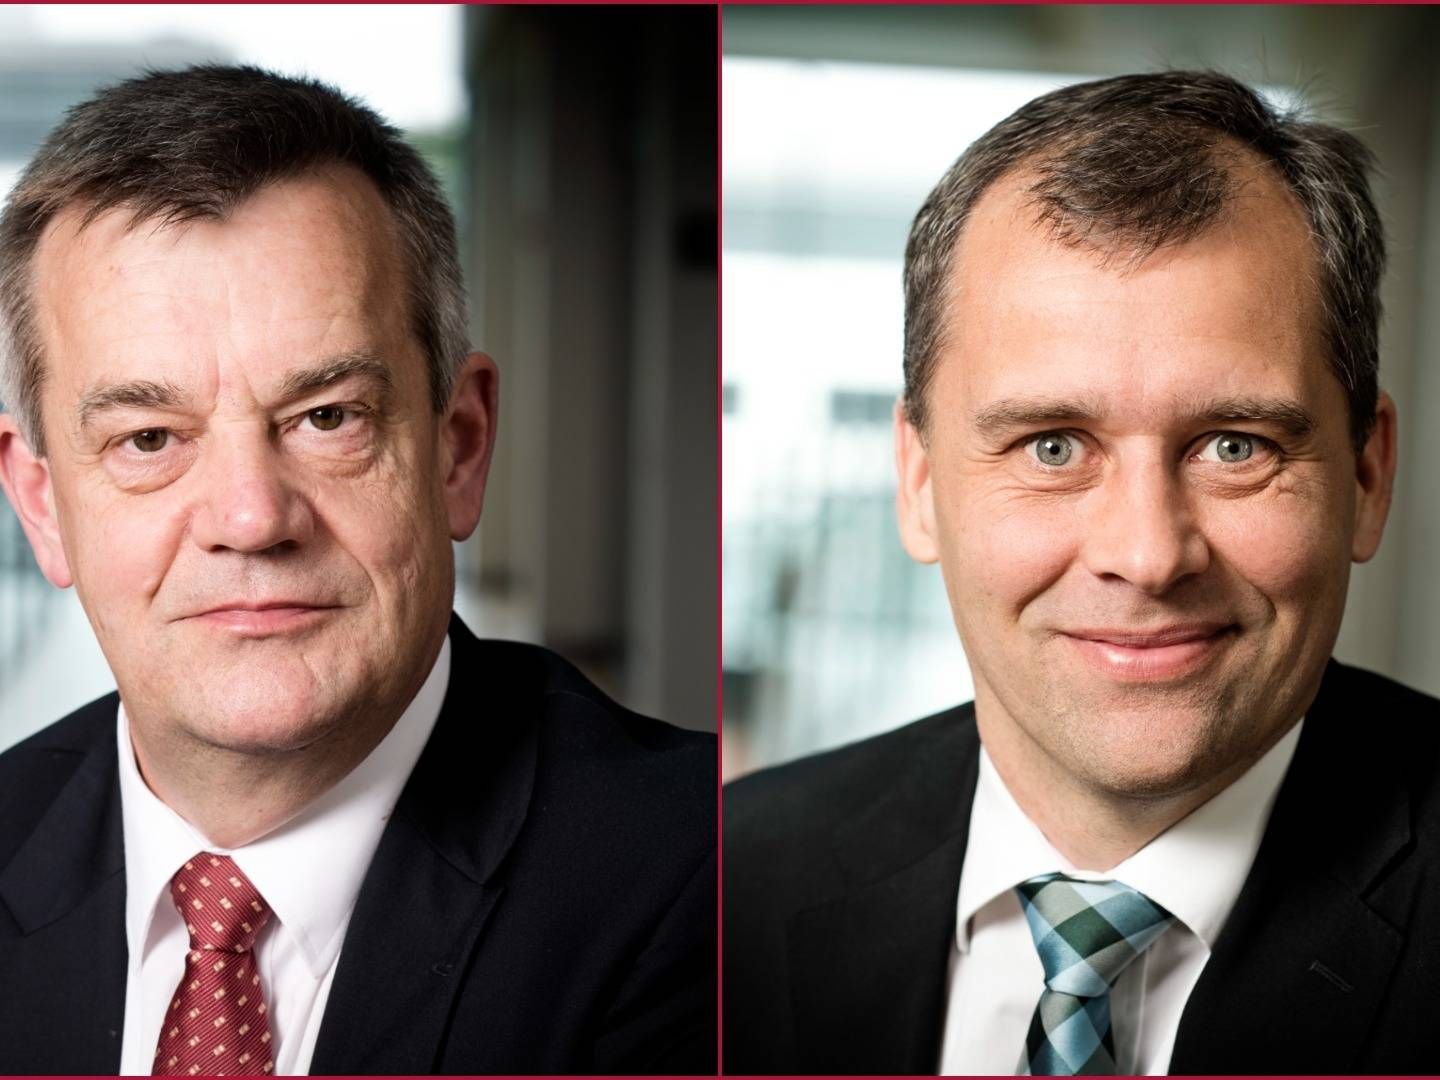 Christian Betz, head of risk and sustainability at Jyske Capital and Allan W. Larsen, head of mortgage bonds at Jyske Capital. | Photo: PR/Jyske Bank